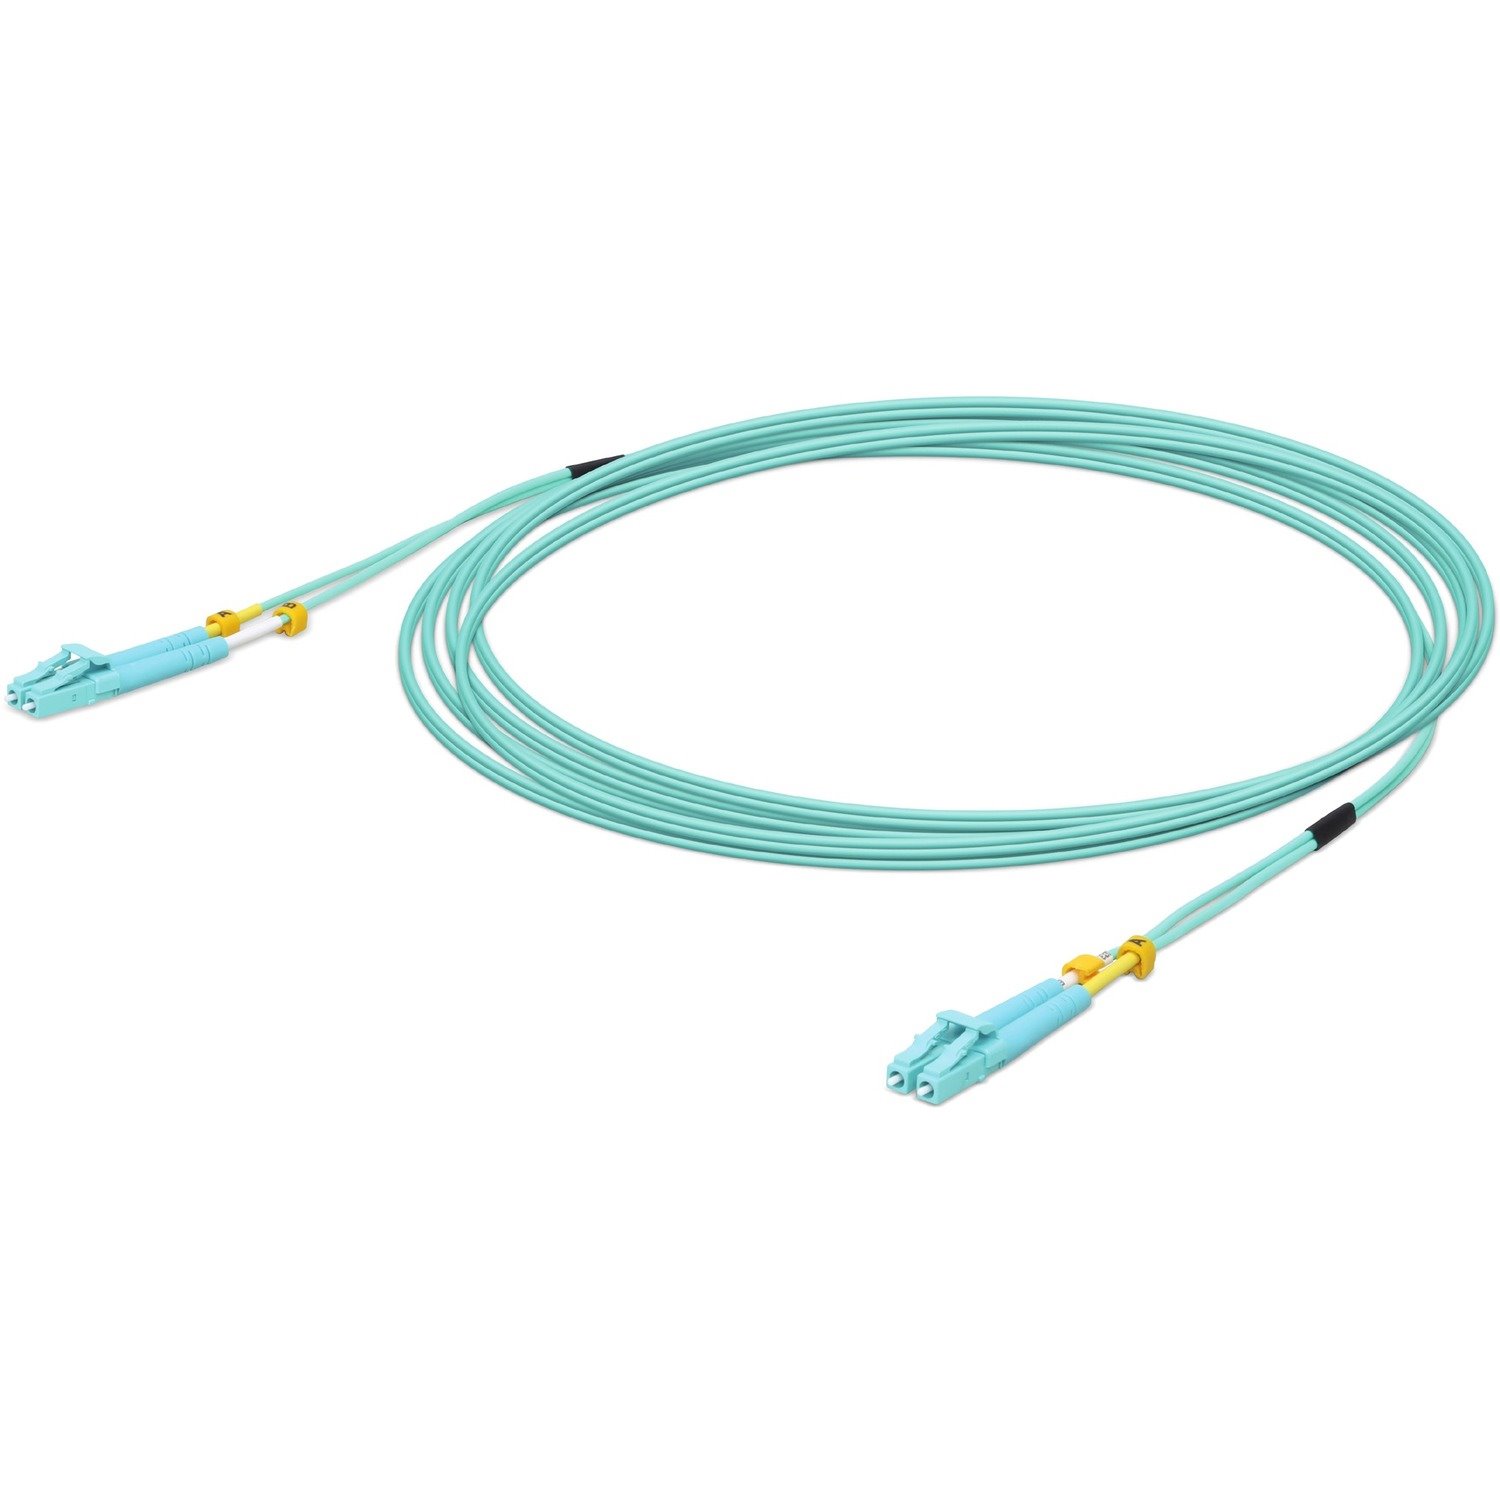 Ubiquiti 5 m Fibre Optic Network Cable for Network Device